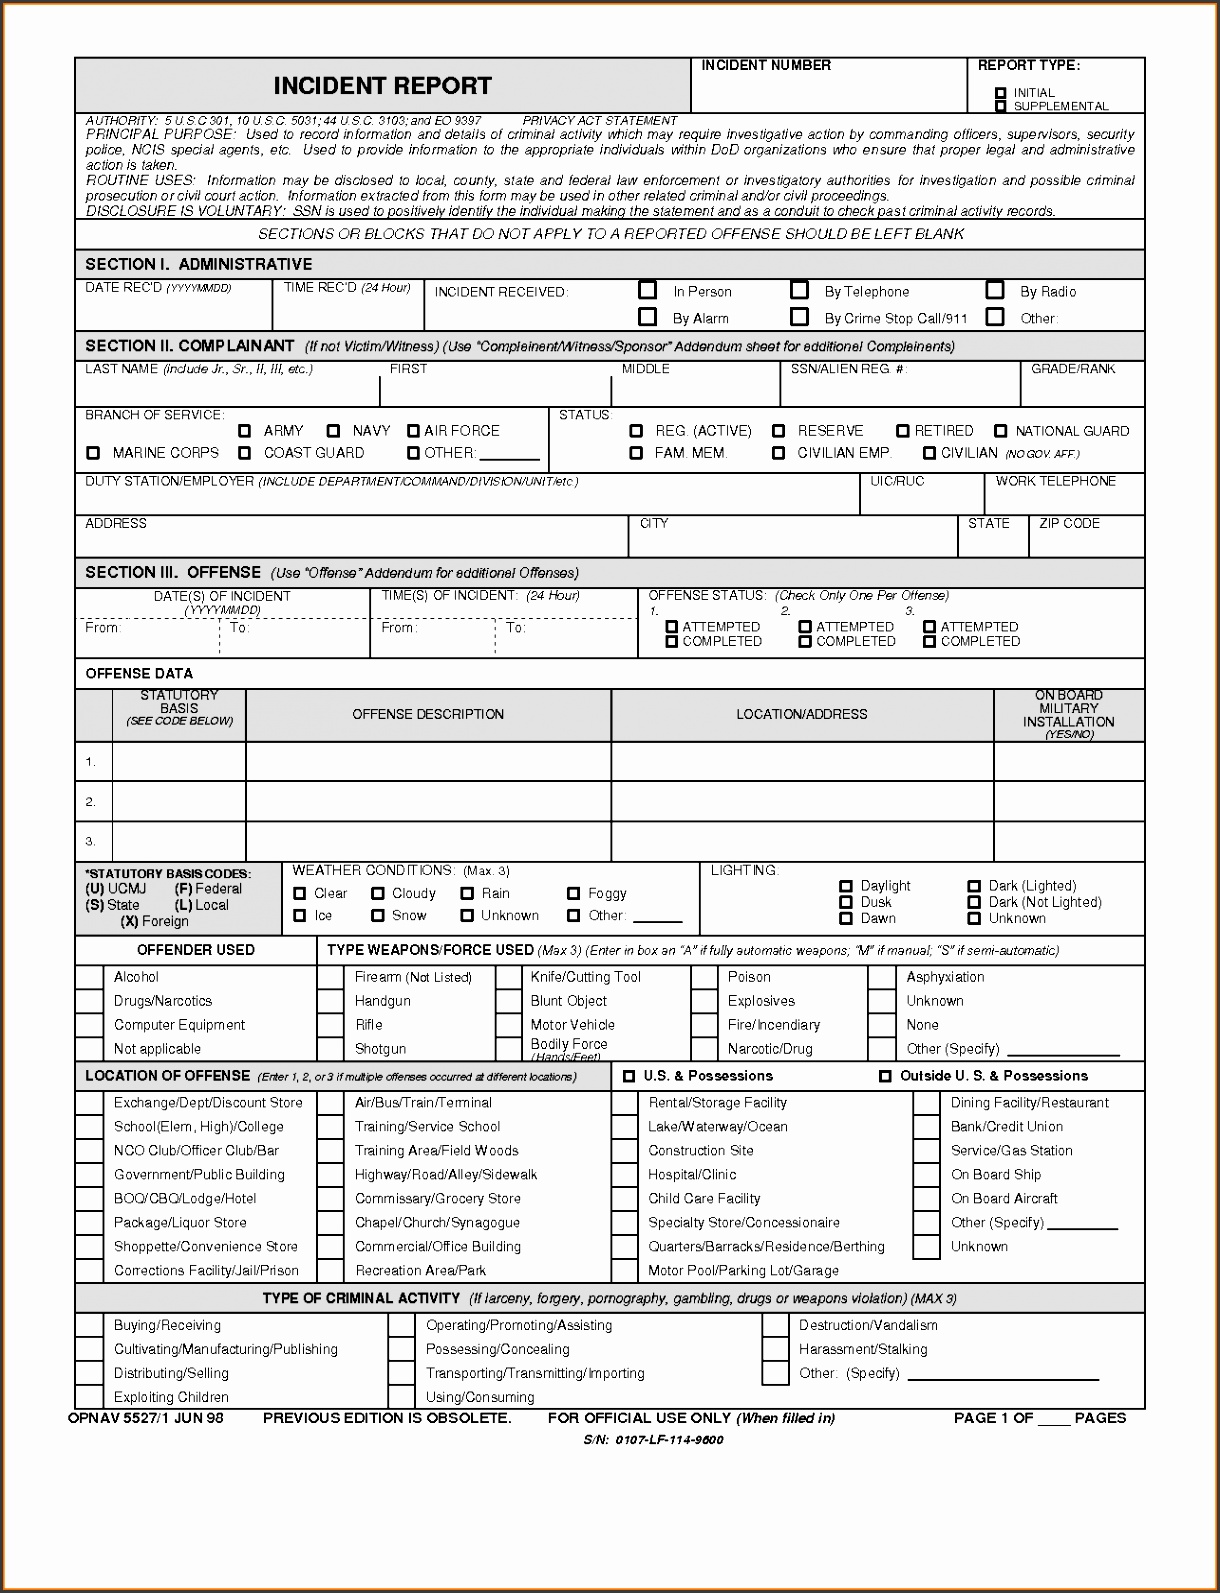 blank police report sales report template 11 empty police report template plantemplate